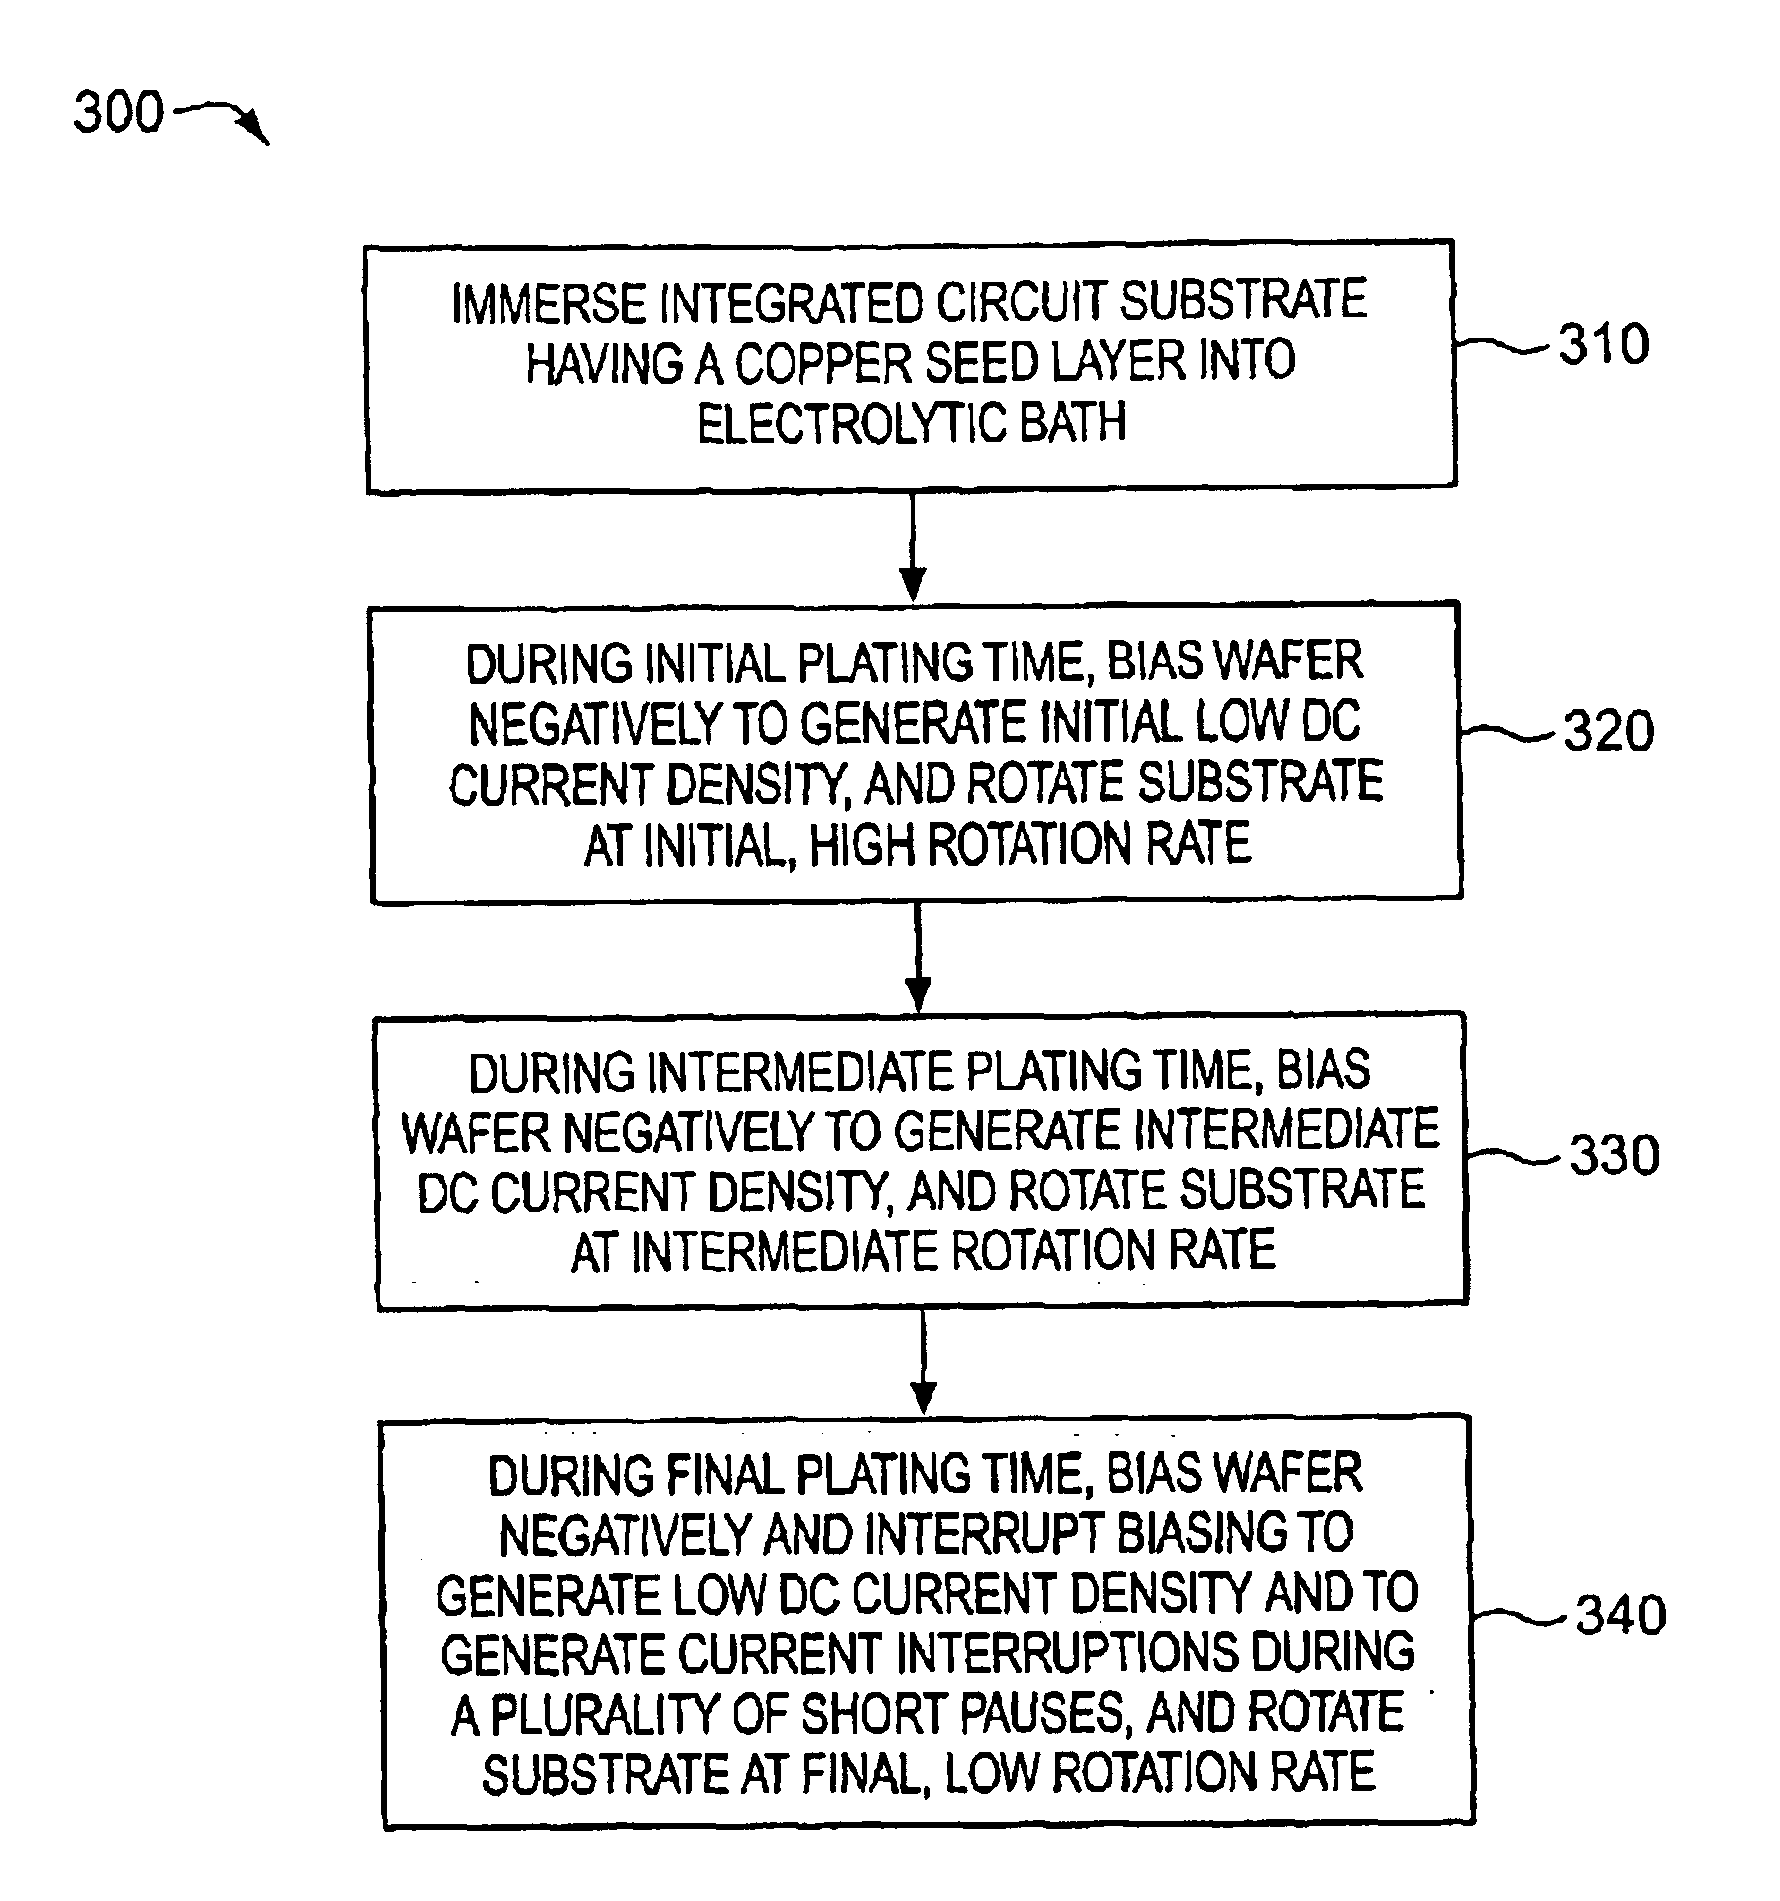 Electroplating using DC current interruption and variable rotation rate